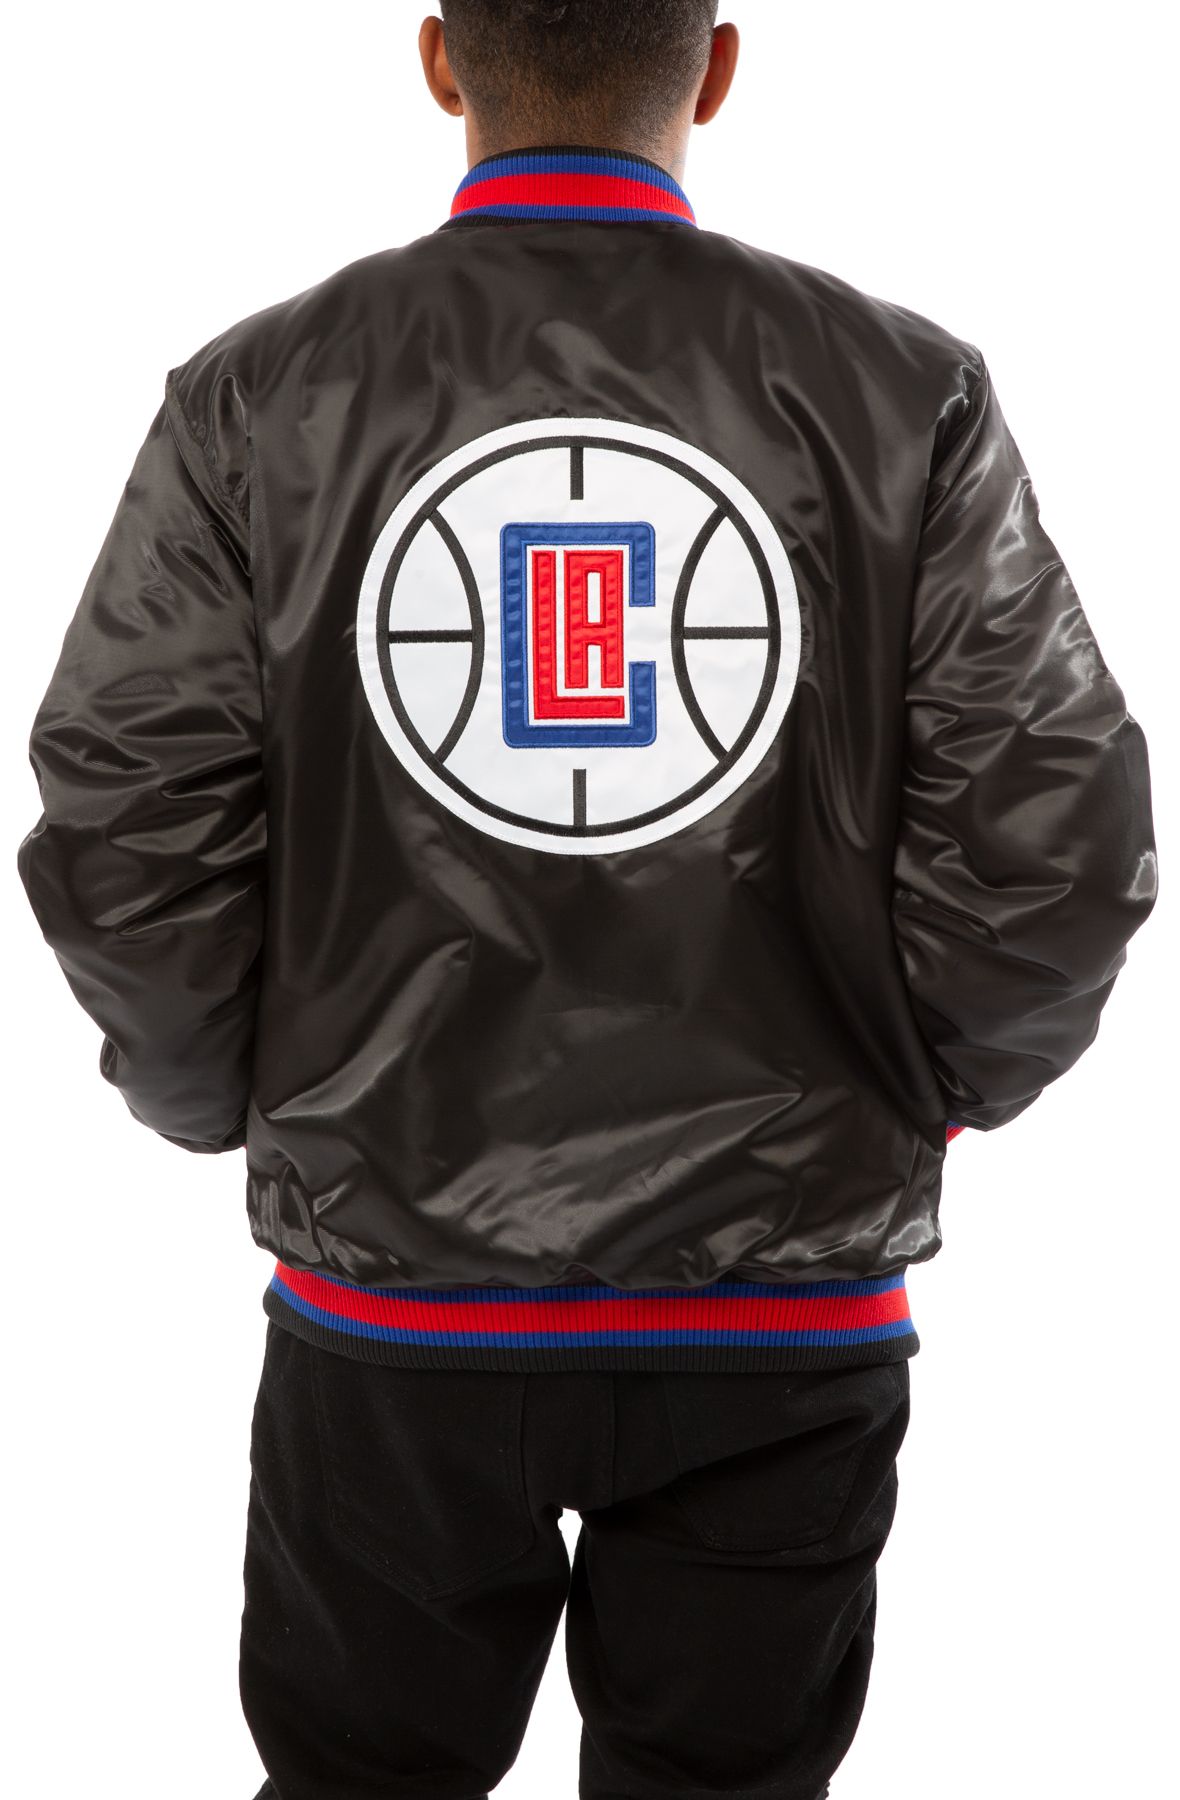 STARTER Los Angeles Clippers Jacket LS03B792-LAC - Shiekh